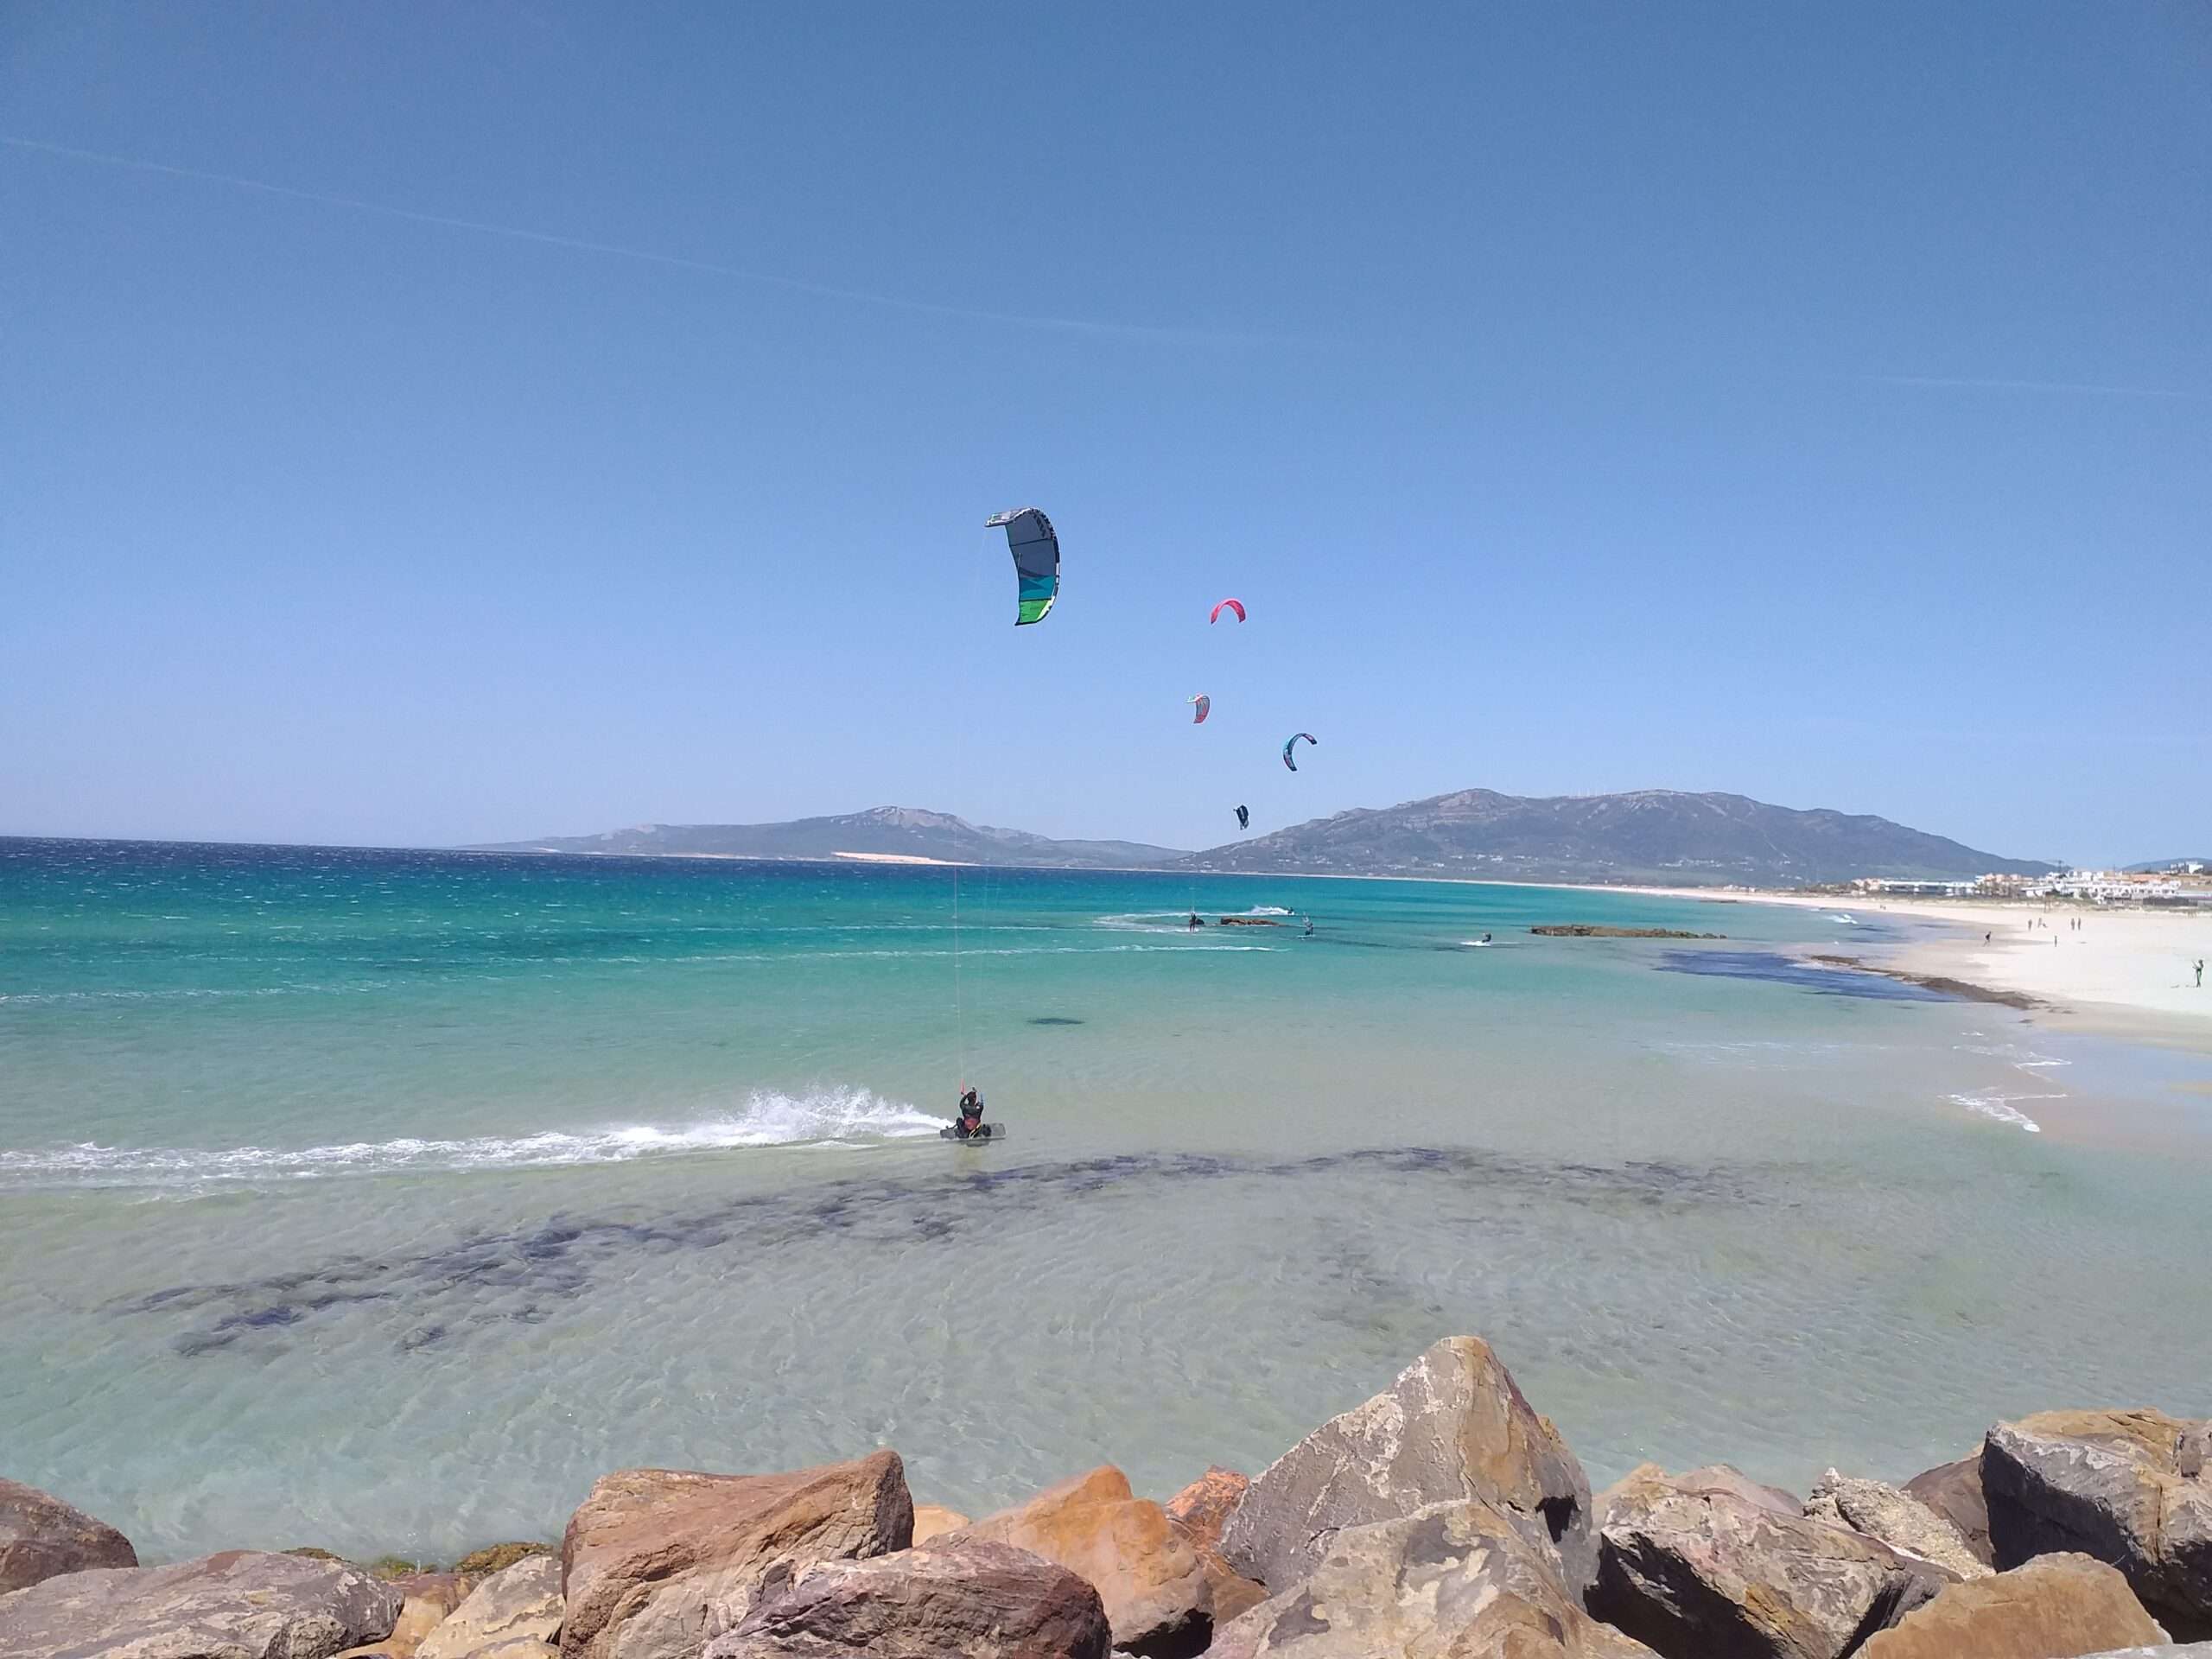 rocks, cristal blue water, white sandy beach, 5 people kitesurfing, mountains in the back